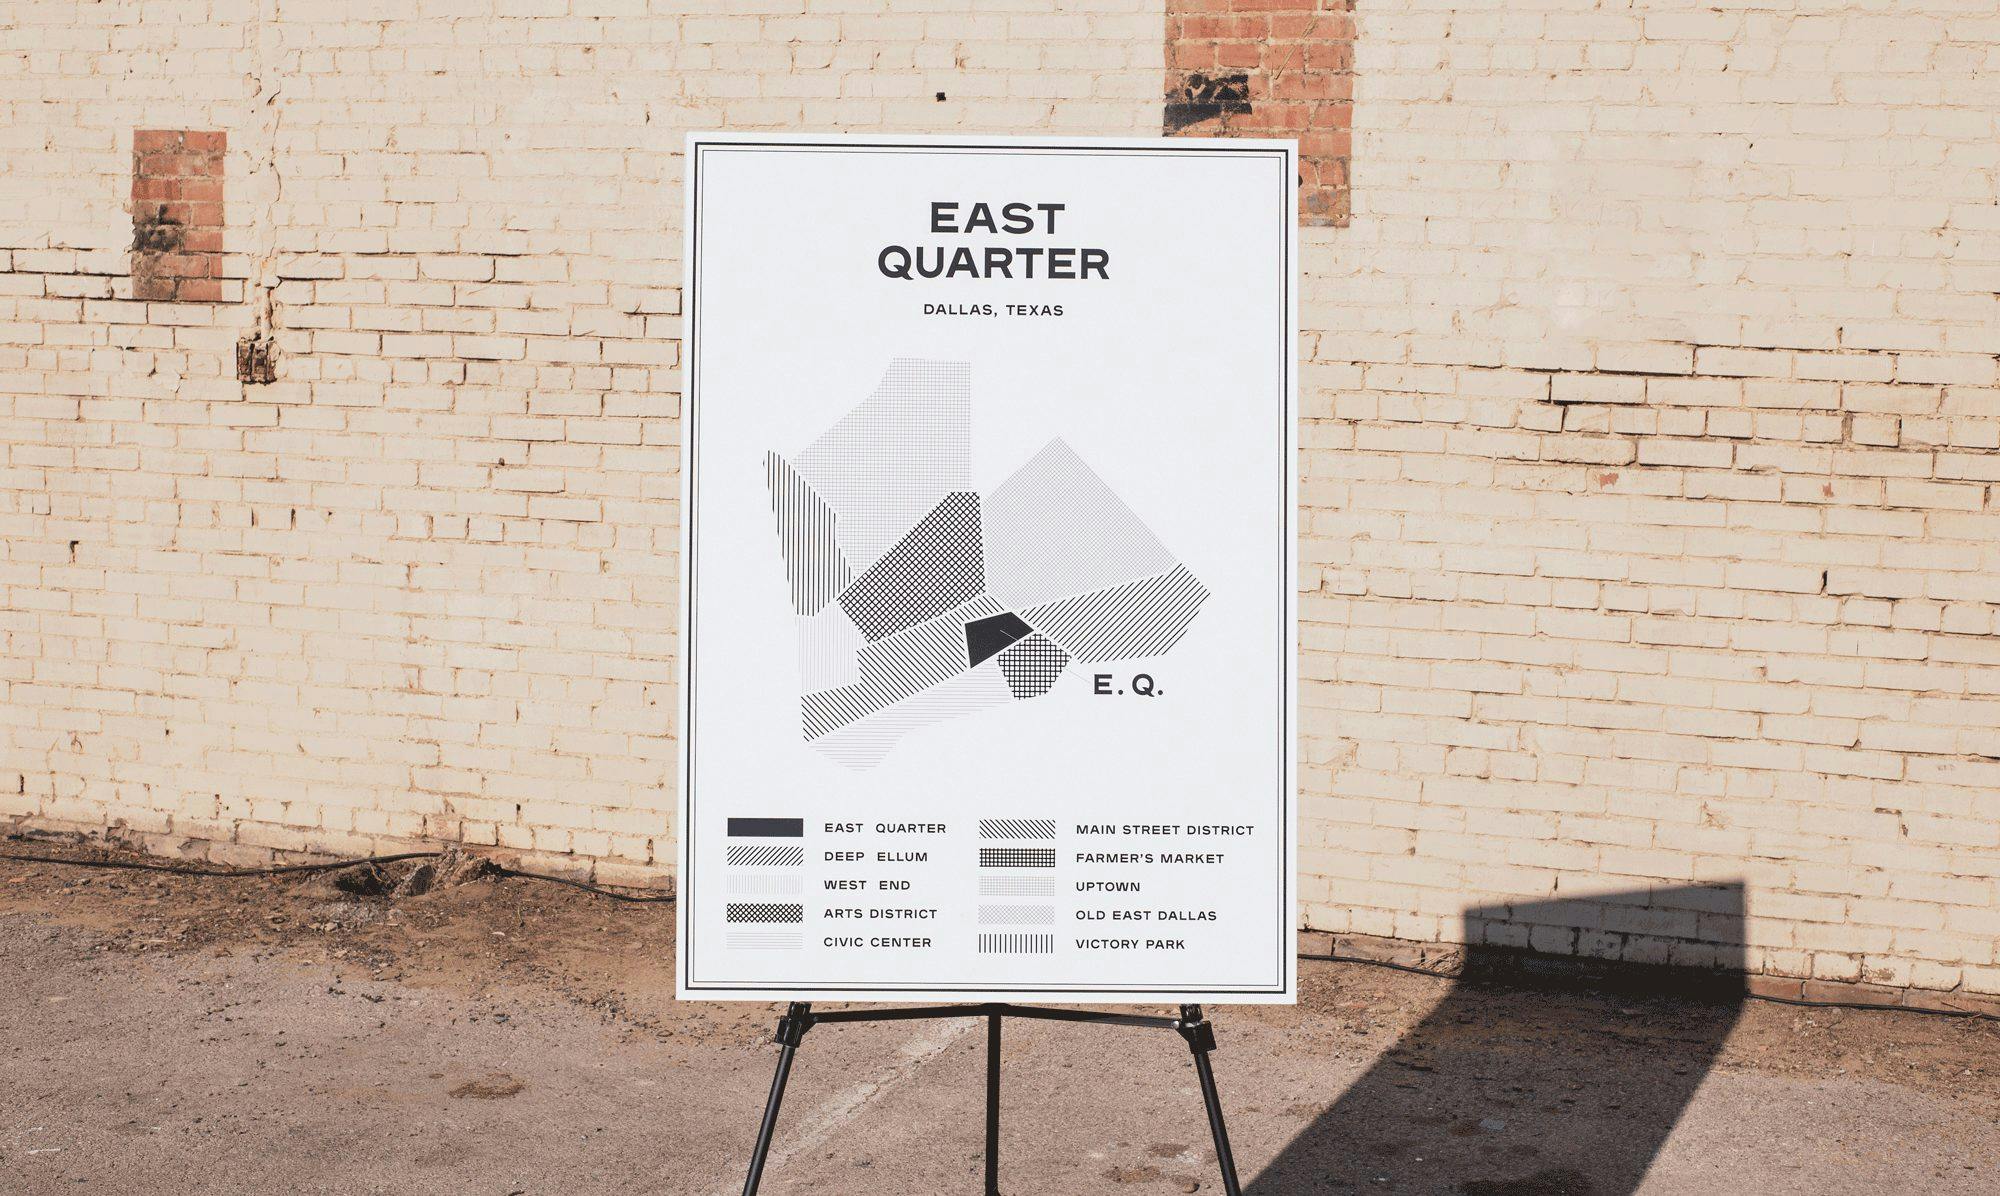 A map of East Quarter propped up in front of a brick wall